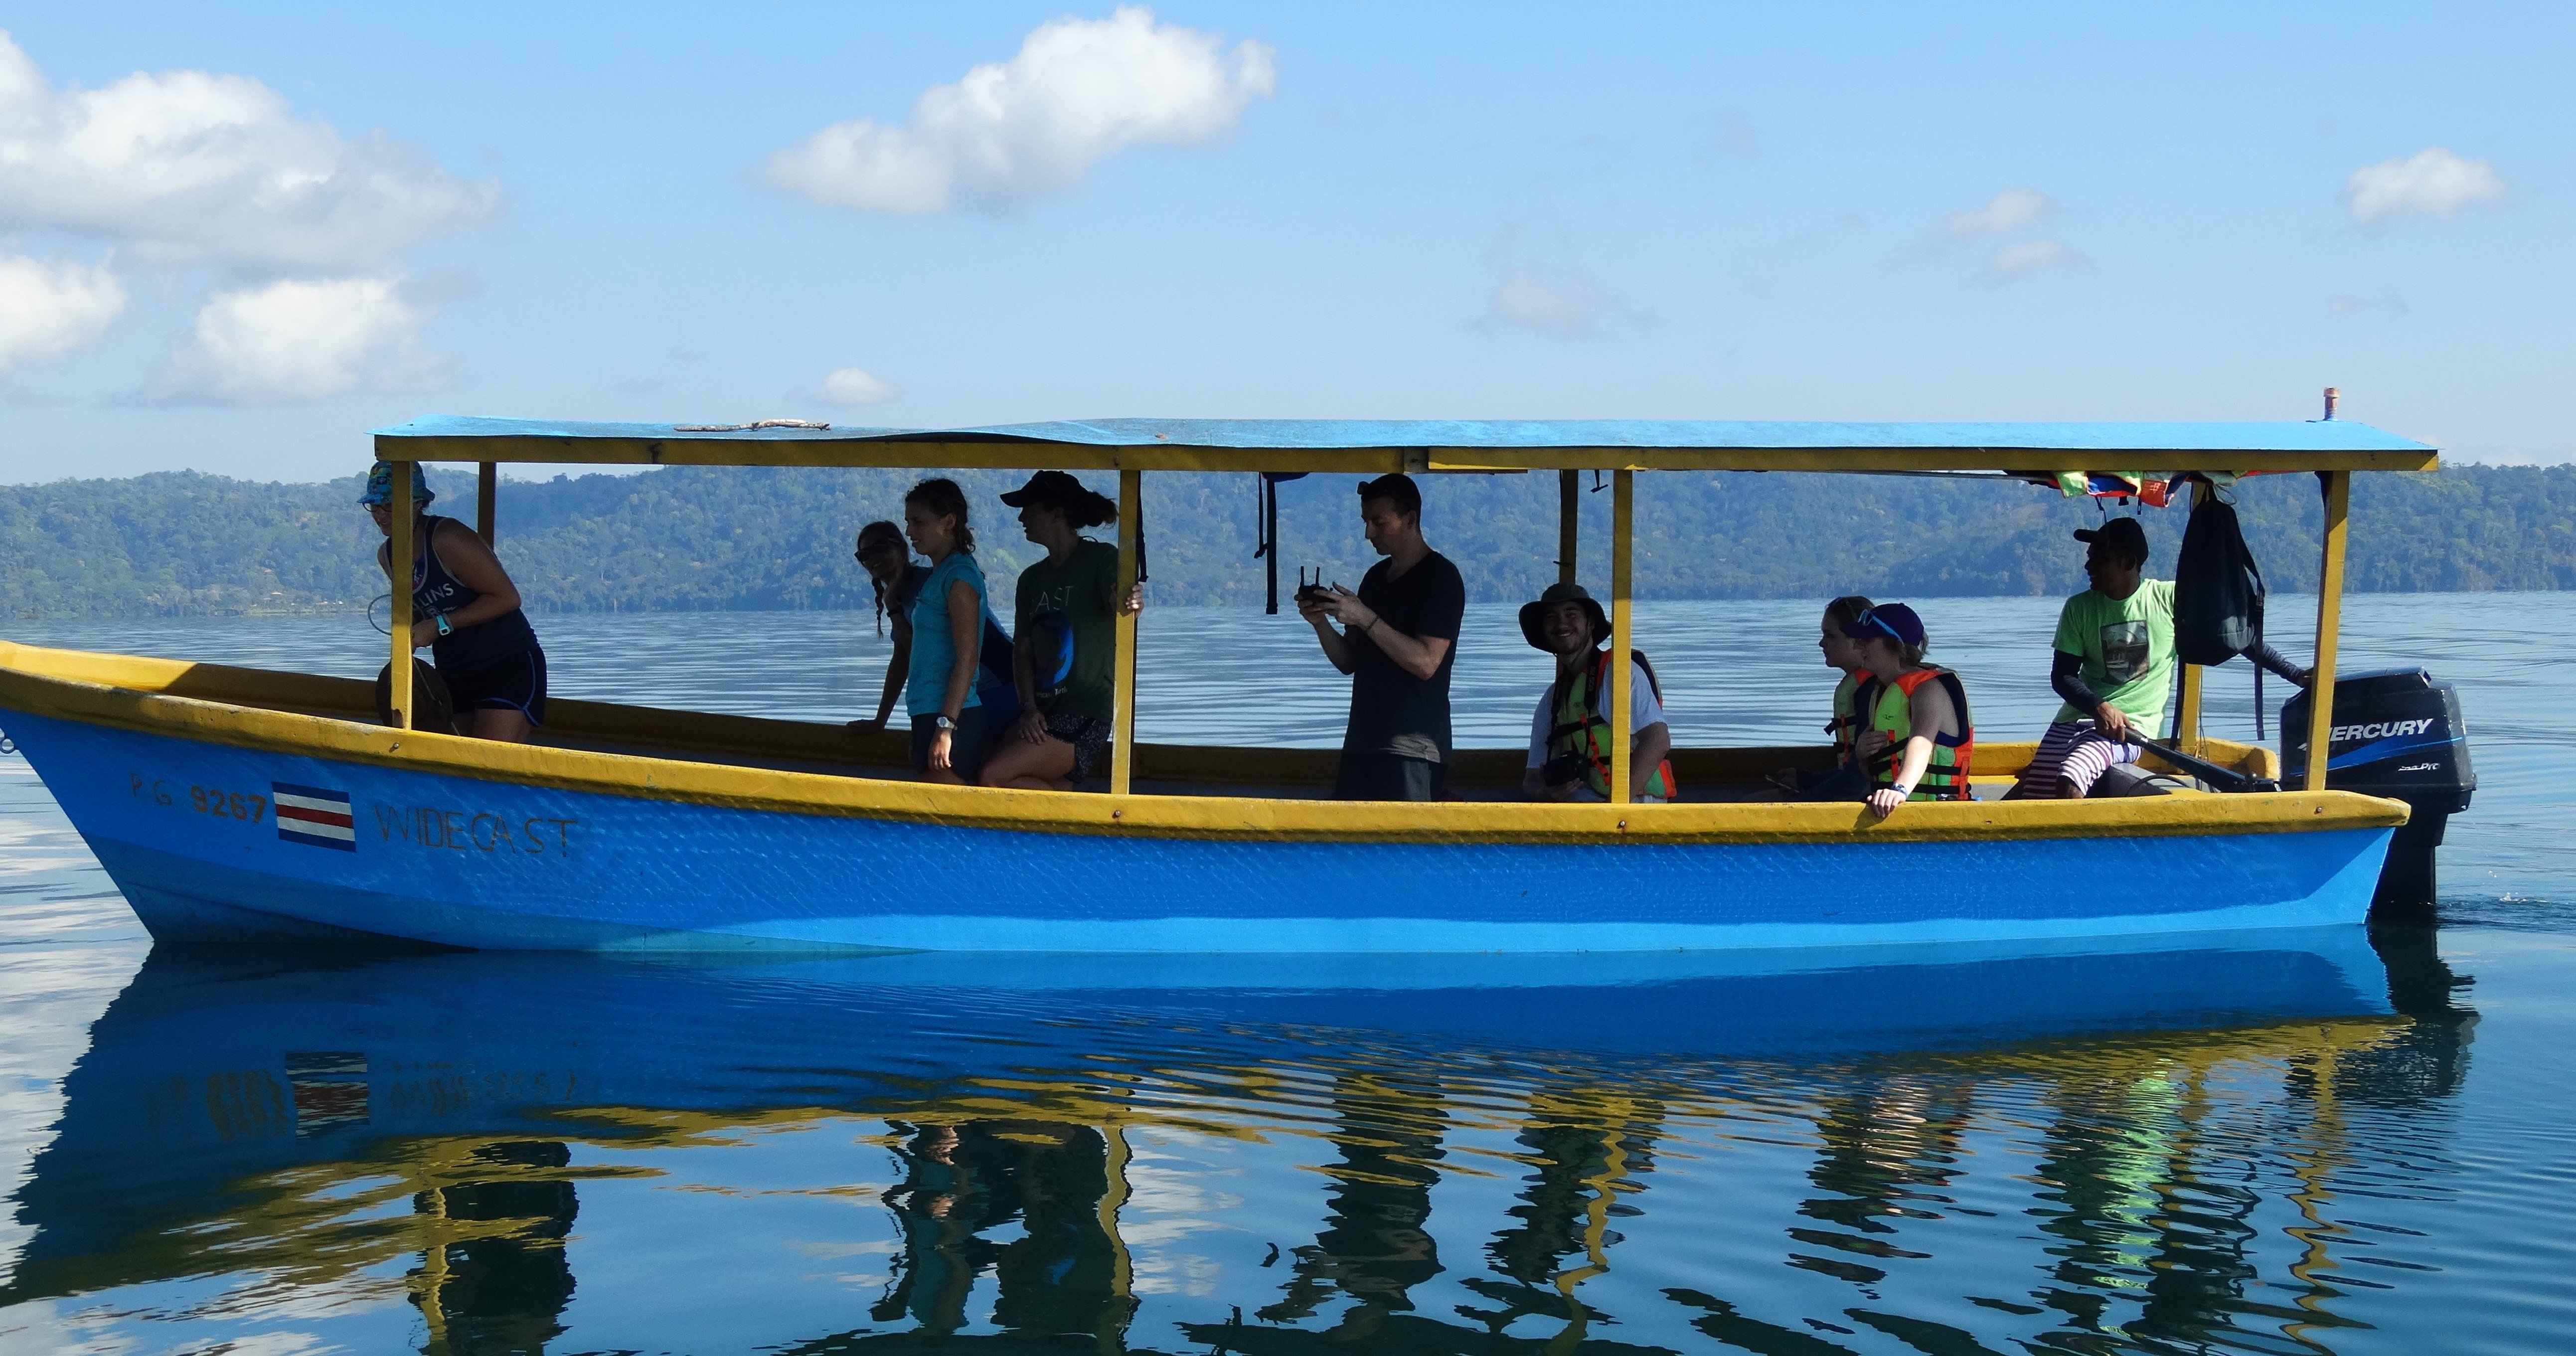 Students inside a blue boat